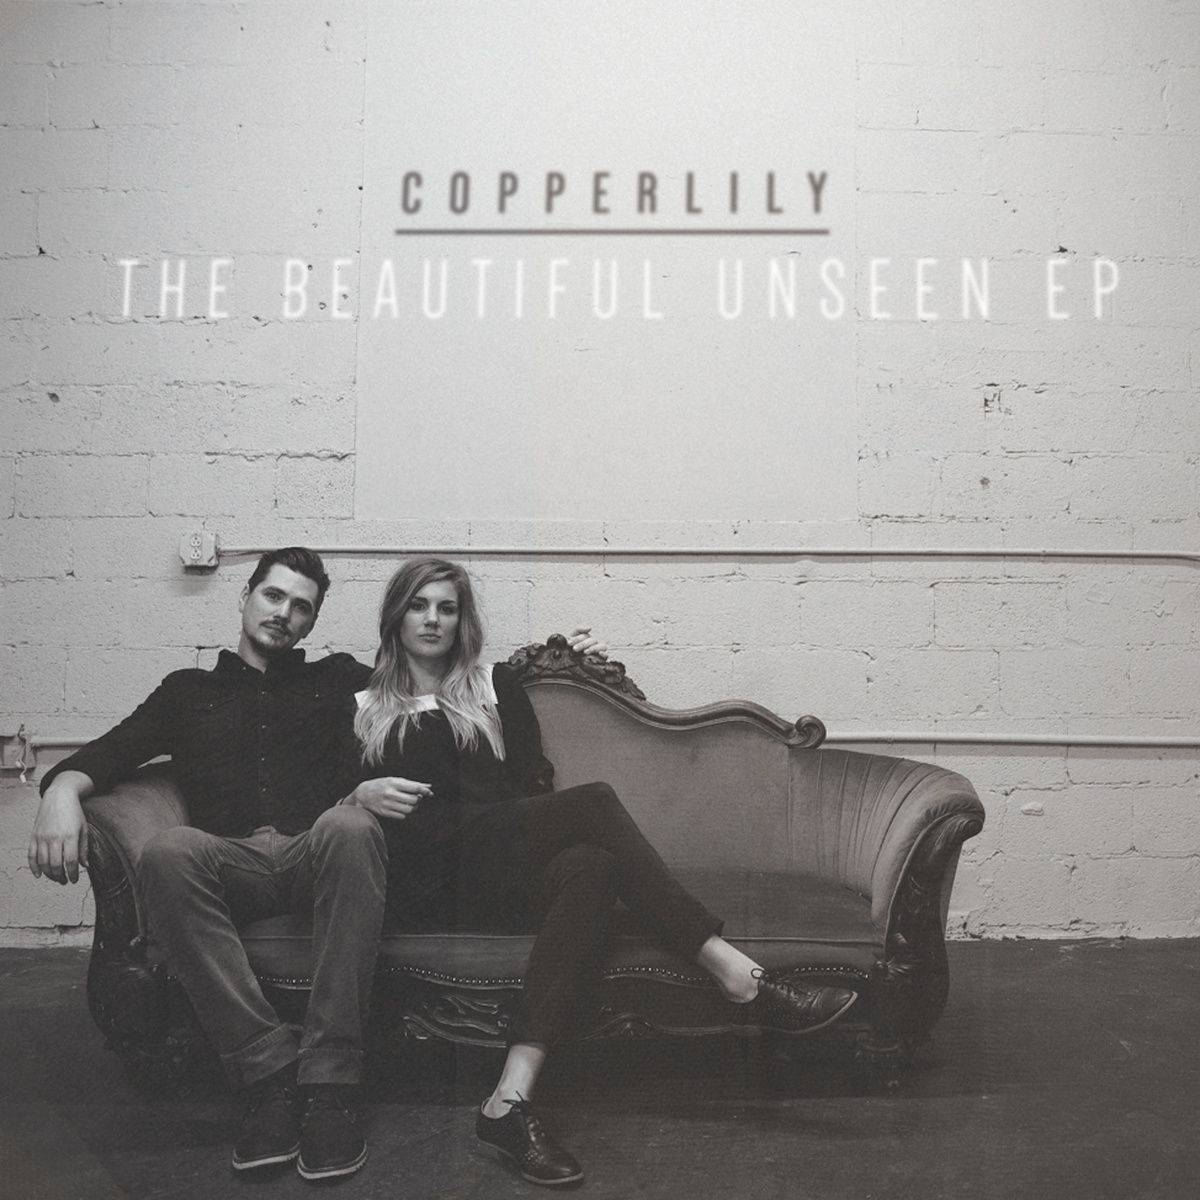 The Beautiful Unseen - EP